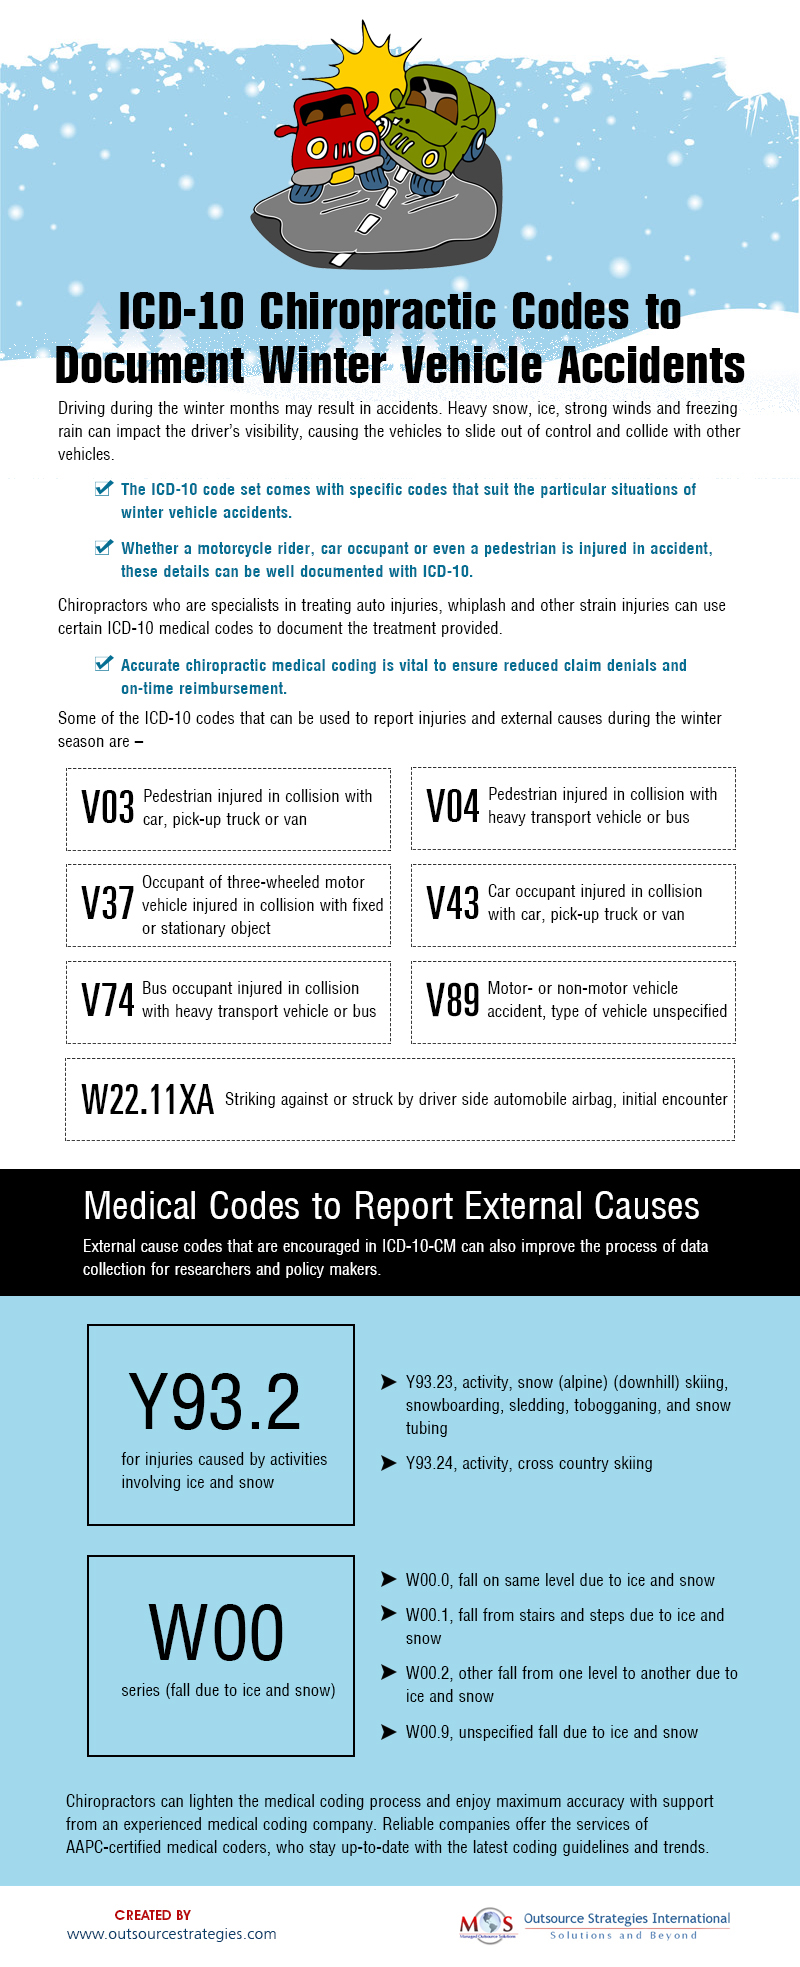 ICD-10 Chiropractic Codes to Document Winter Vehicle Accidents